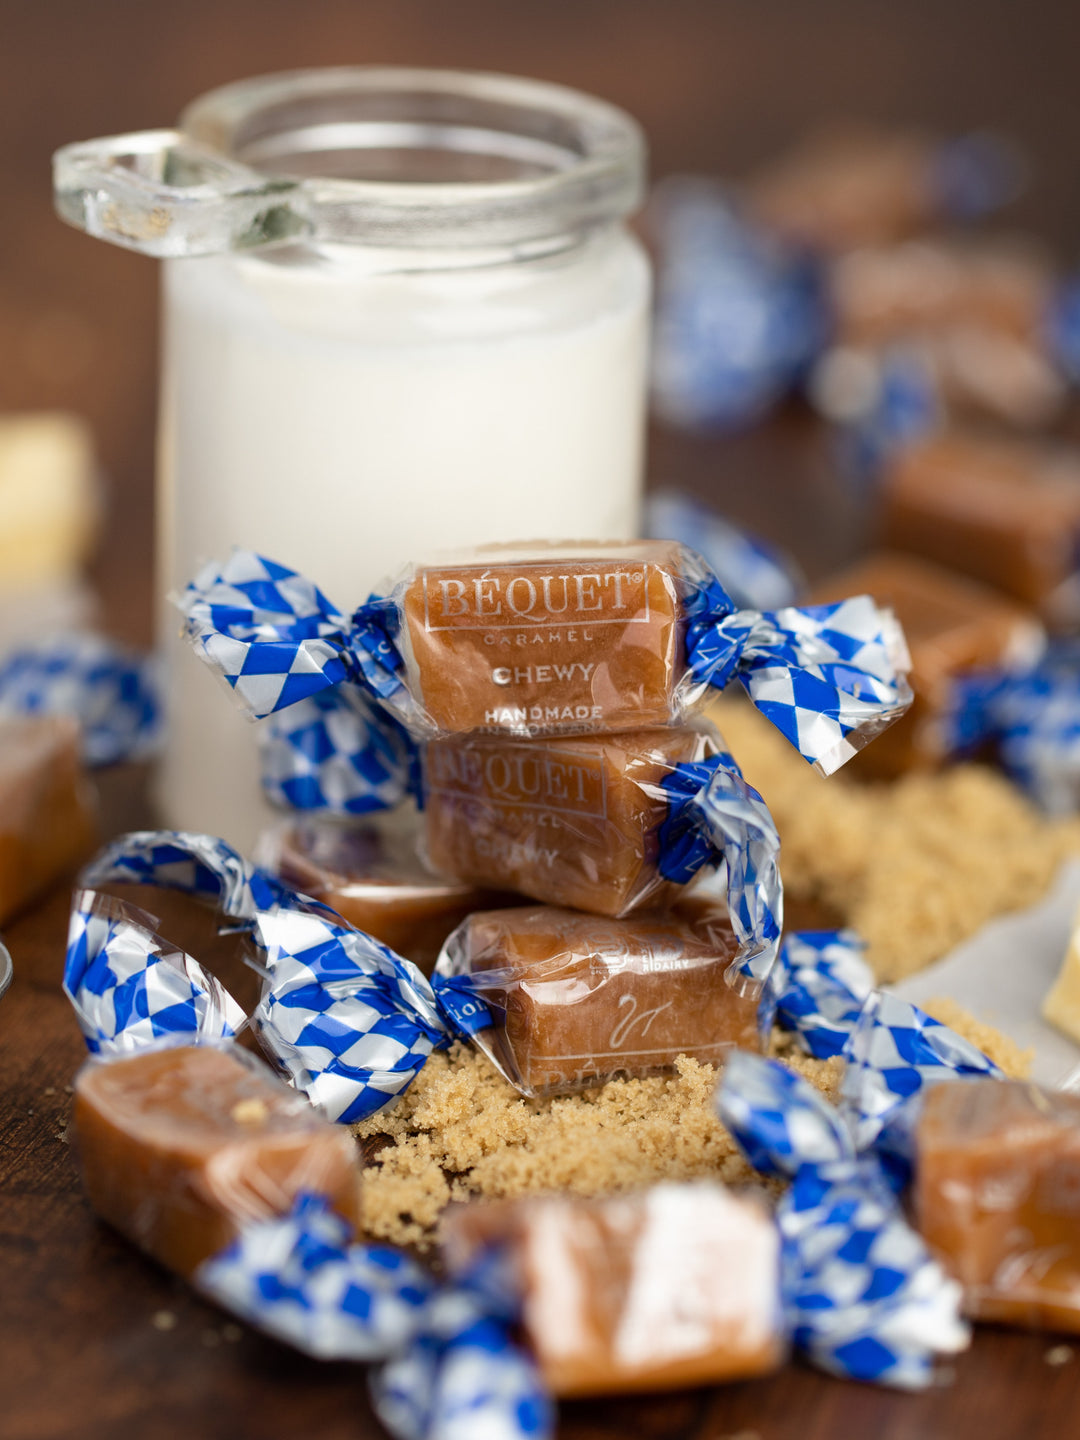 classic bequet caramel#caramel-variety_chewy